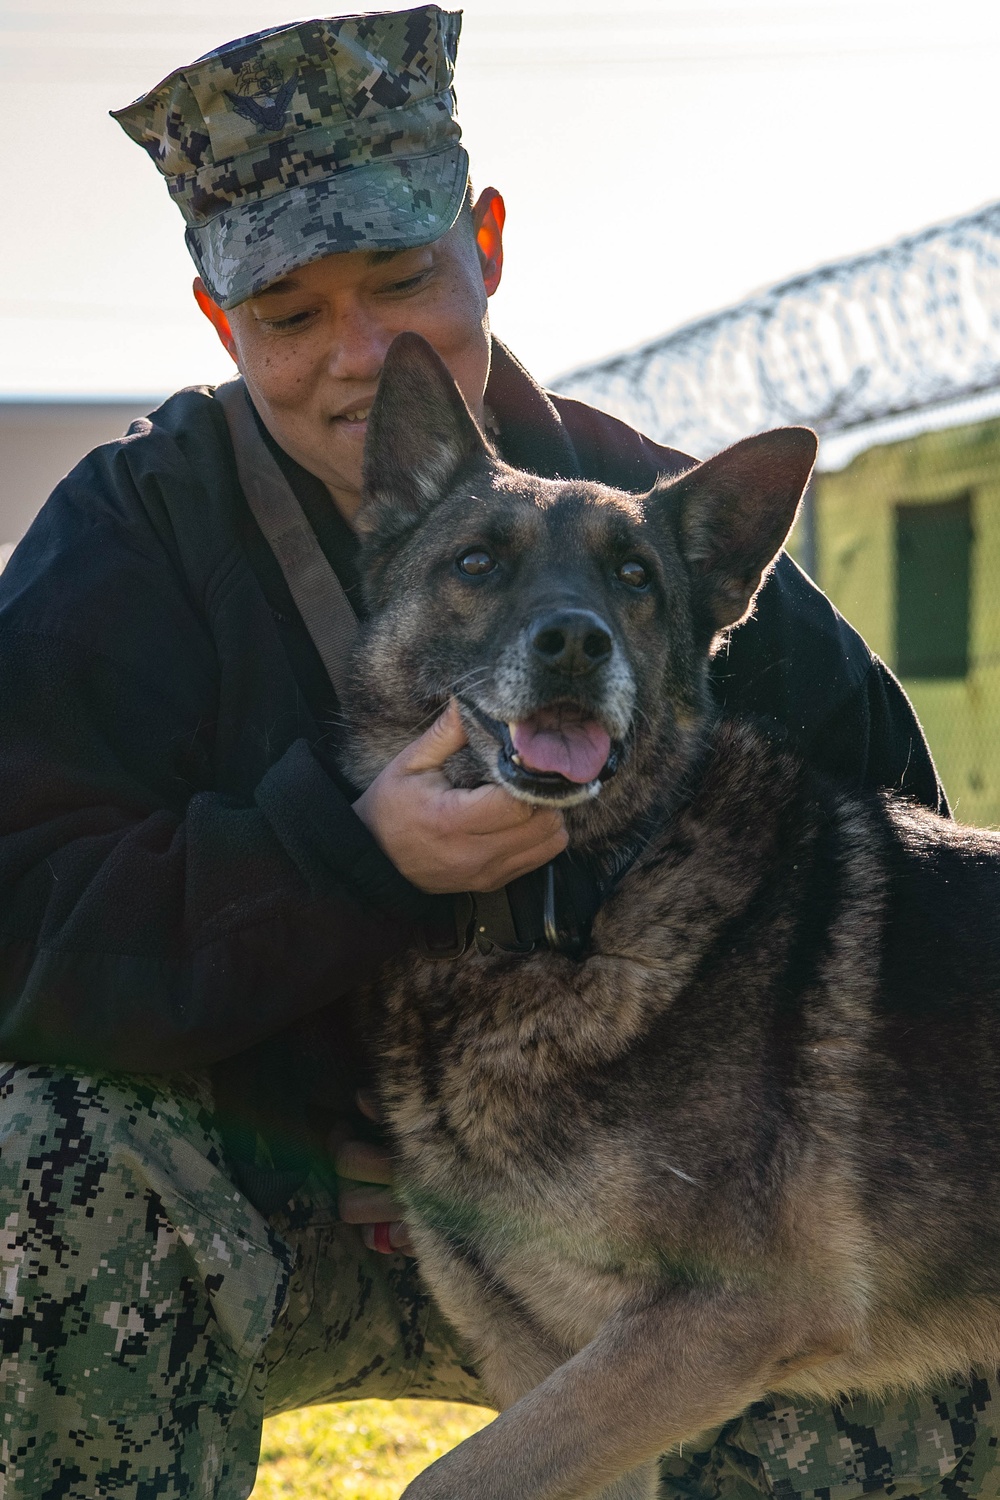 DVIDS - News - Man's Best Friend: The Dogs of Naval Station Rota's ...